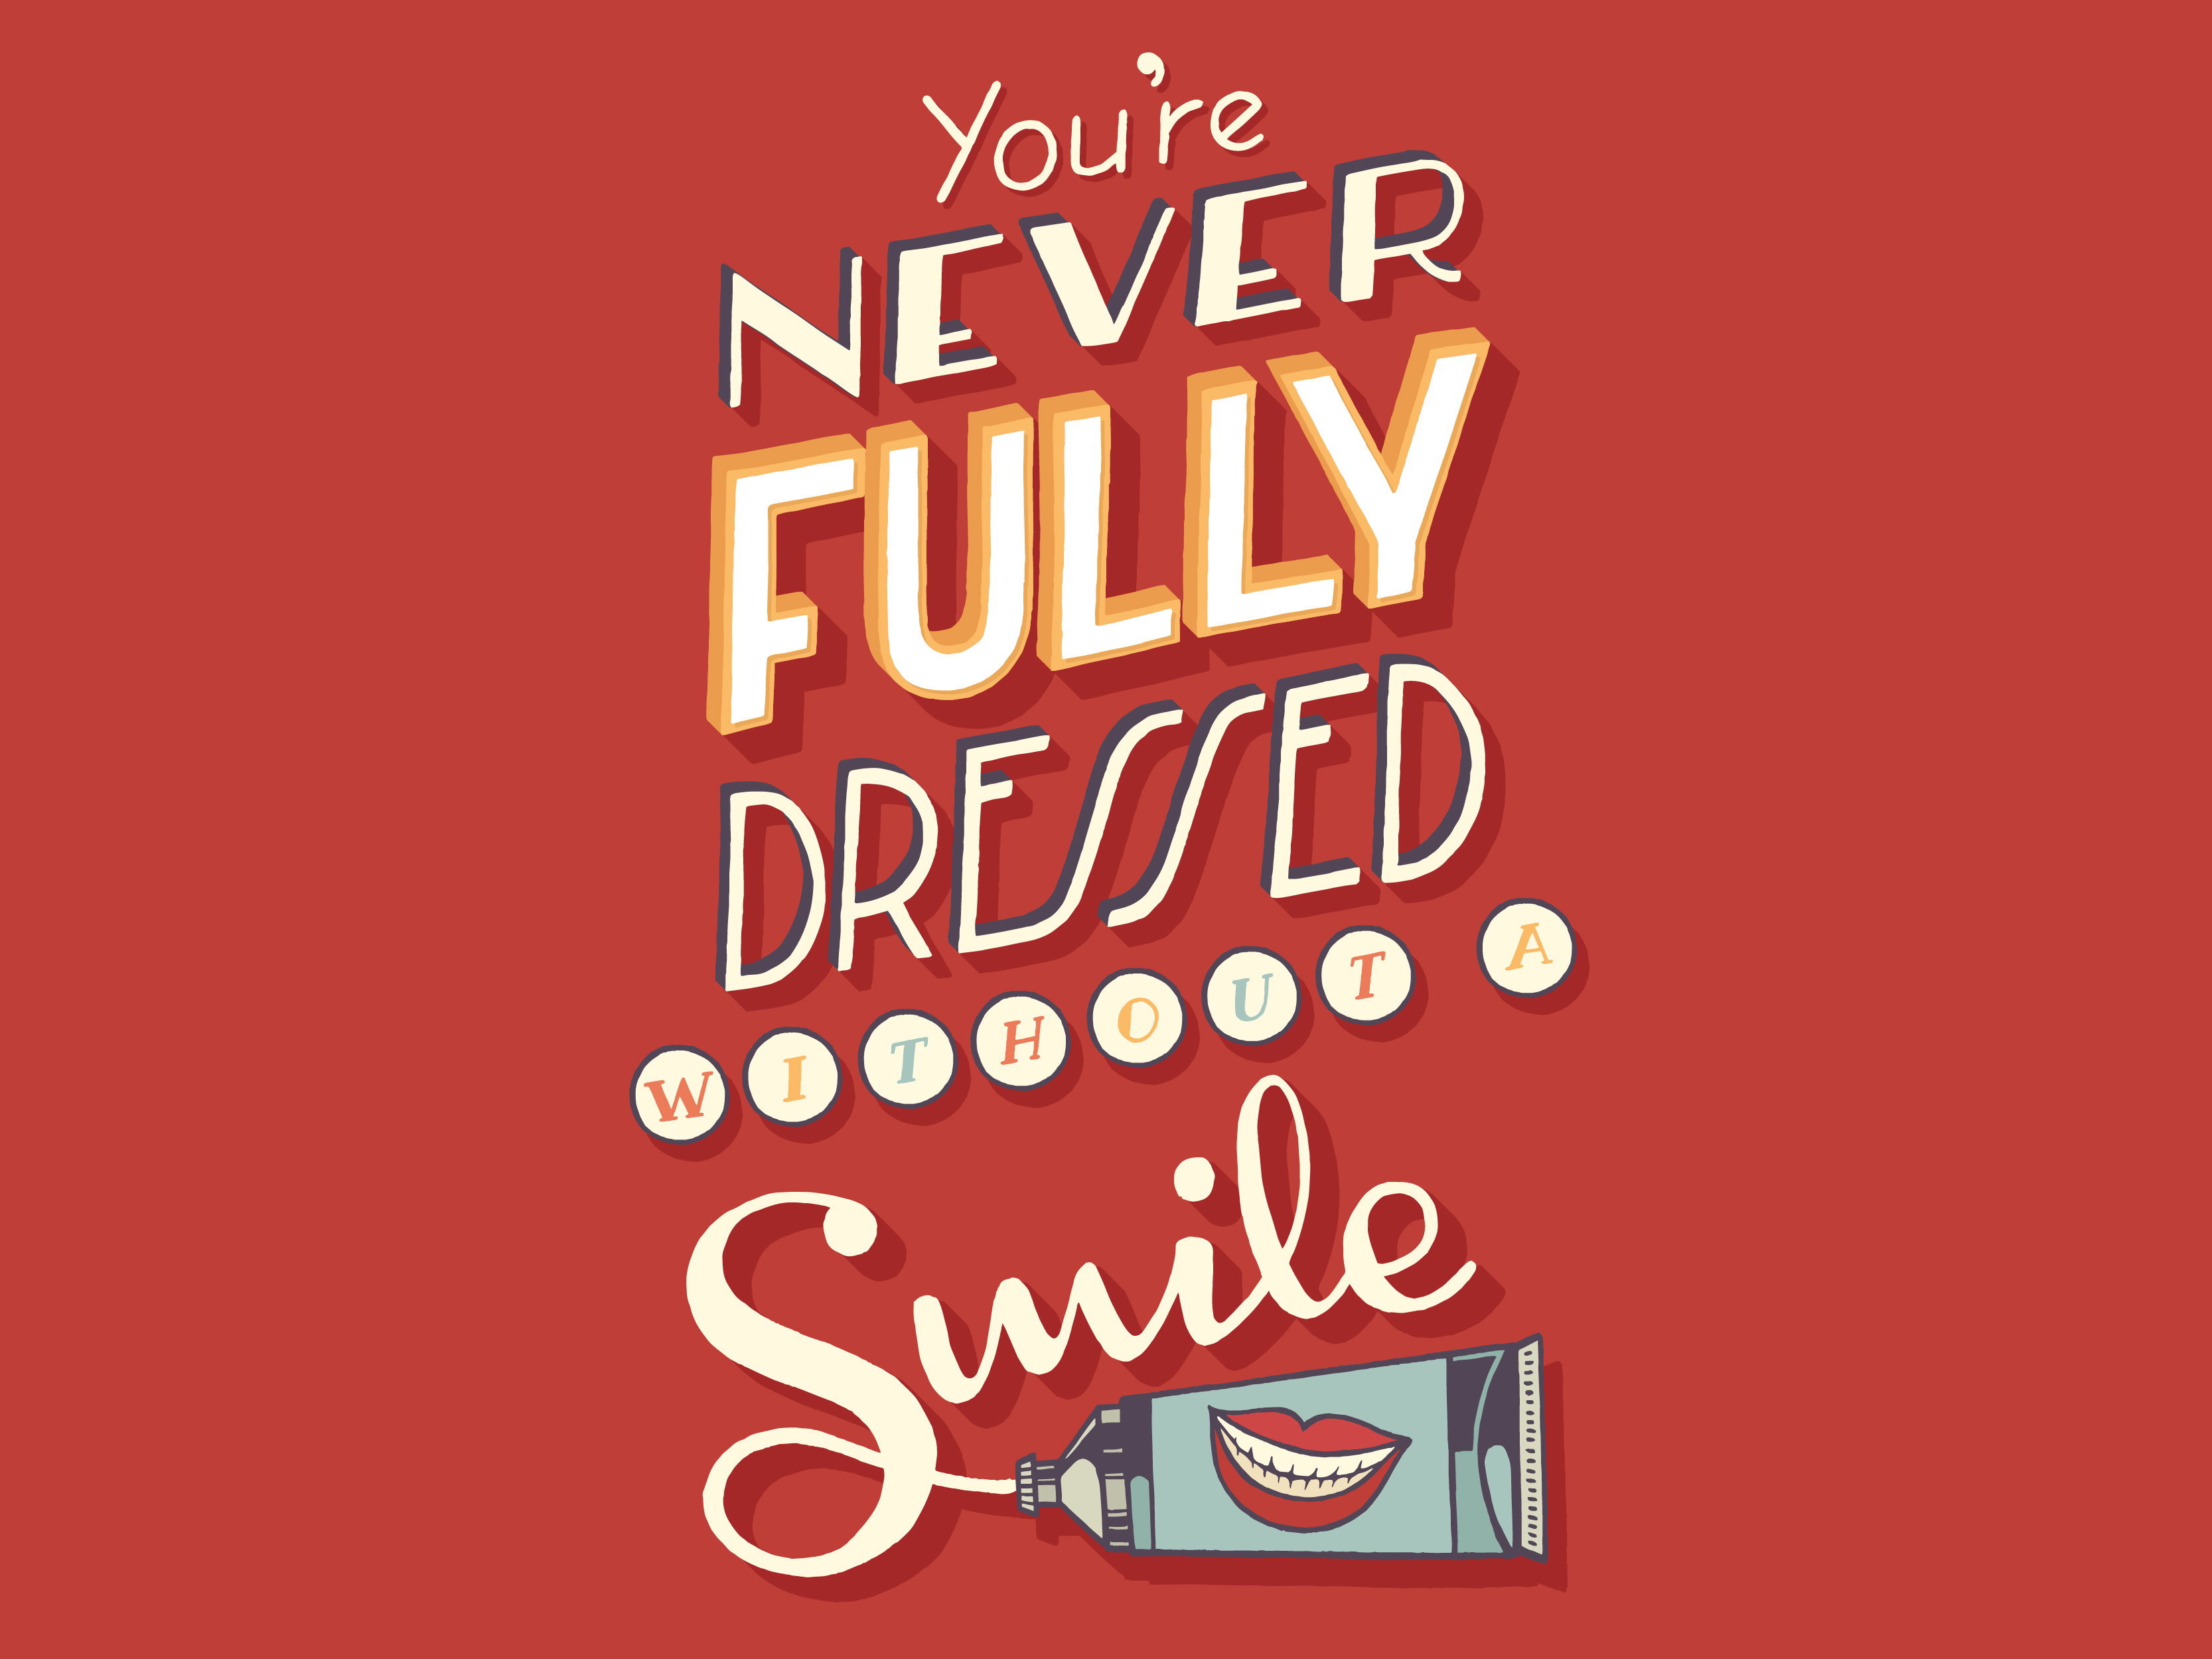 youre never fully dressed without a smile